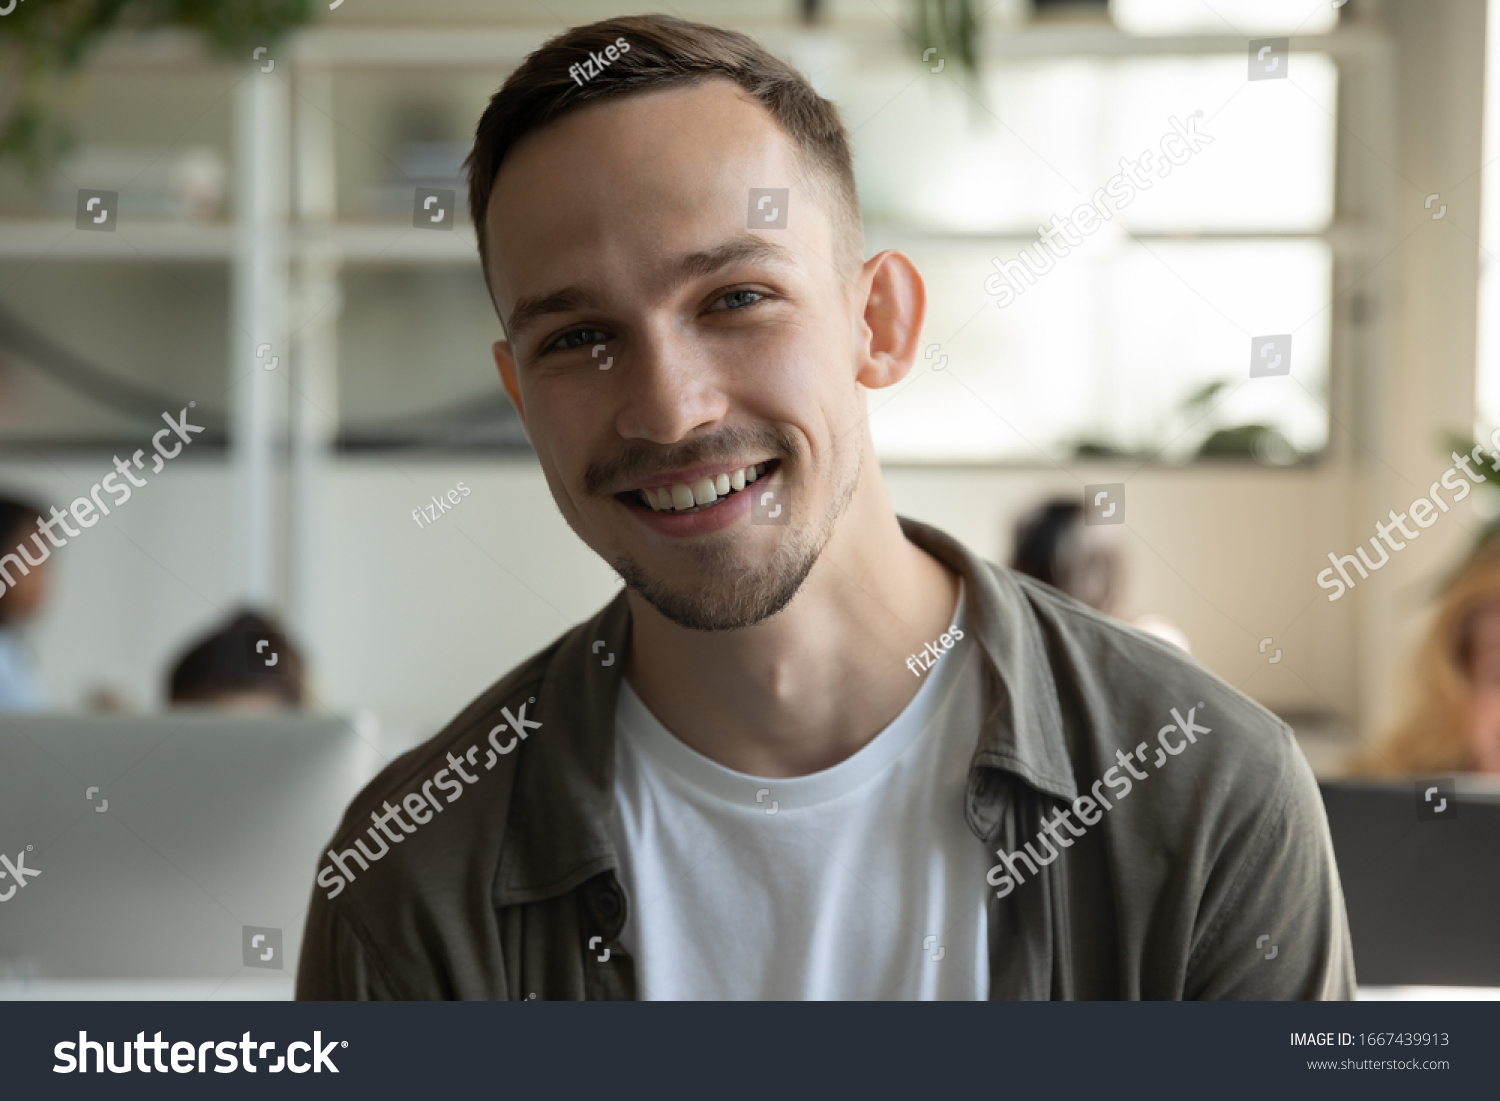 Headshot portrait of smiling millennial male employee talk on video call or web conference in coworking office, profile picture of happy Caucasian young man worker posing in shared workplace #1667439913